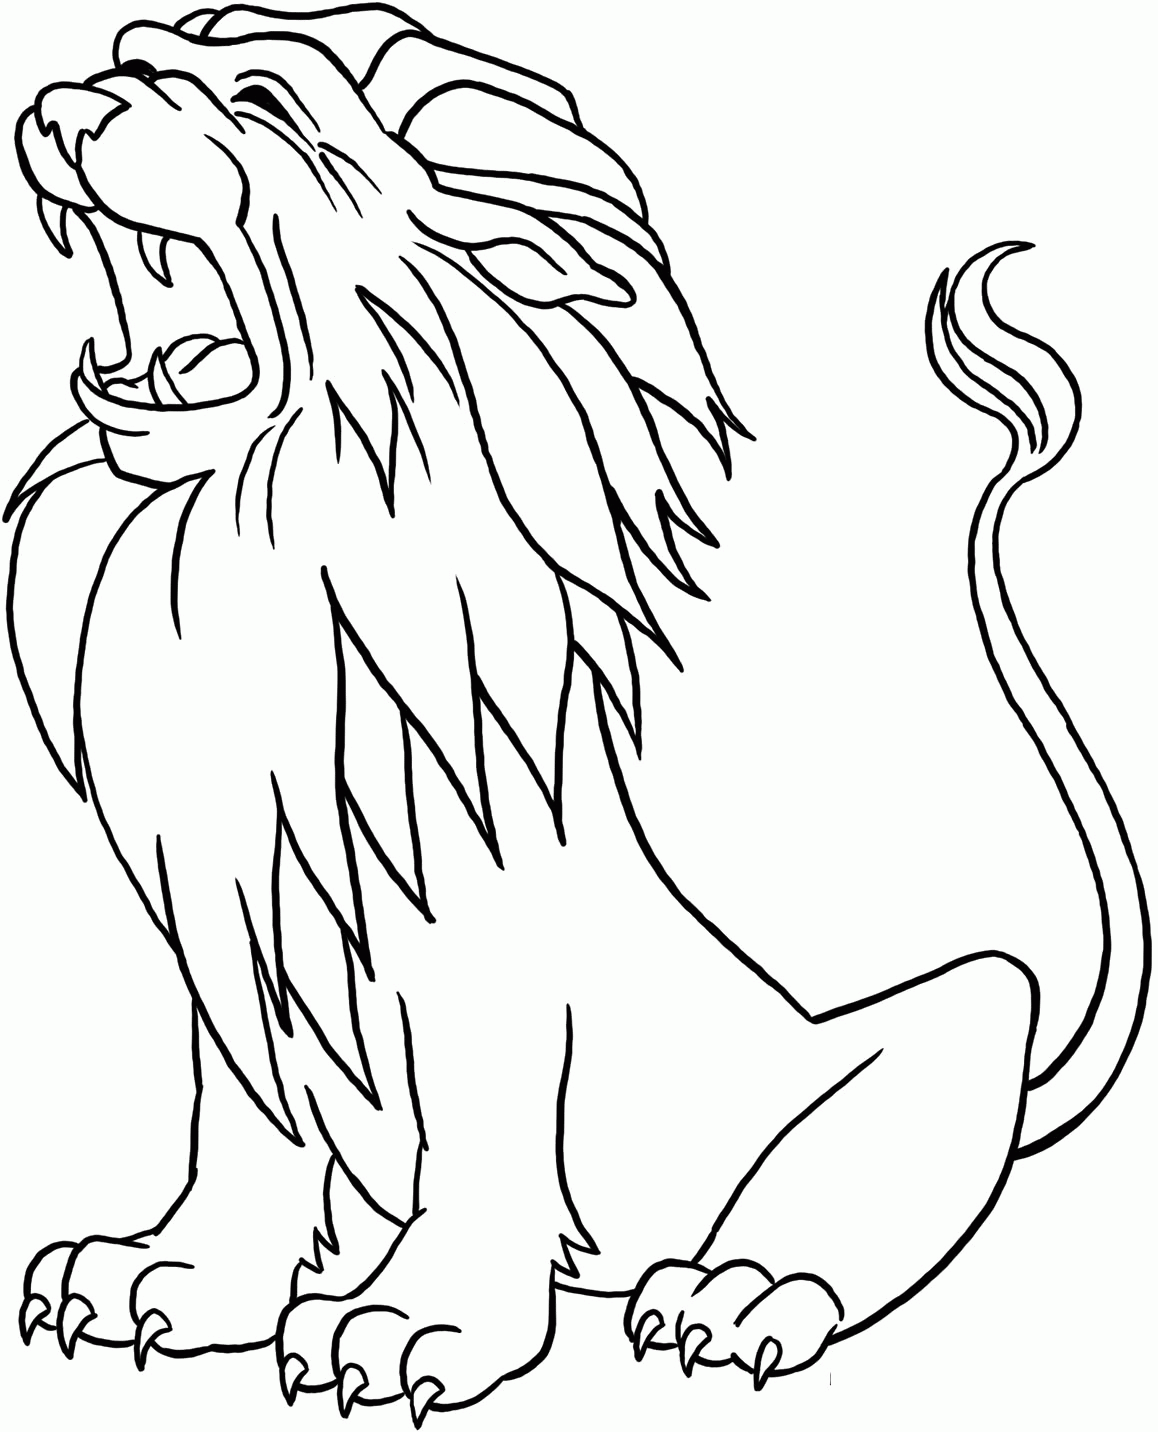 A LION WITH LITTLE LIONS COLORING PAGES - Coloring Home